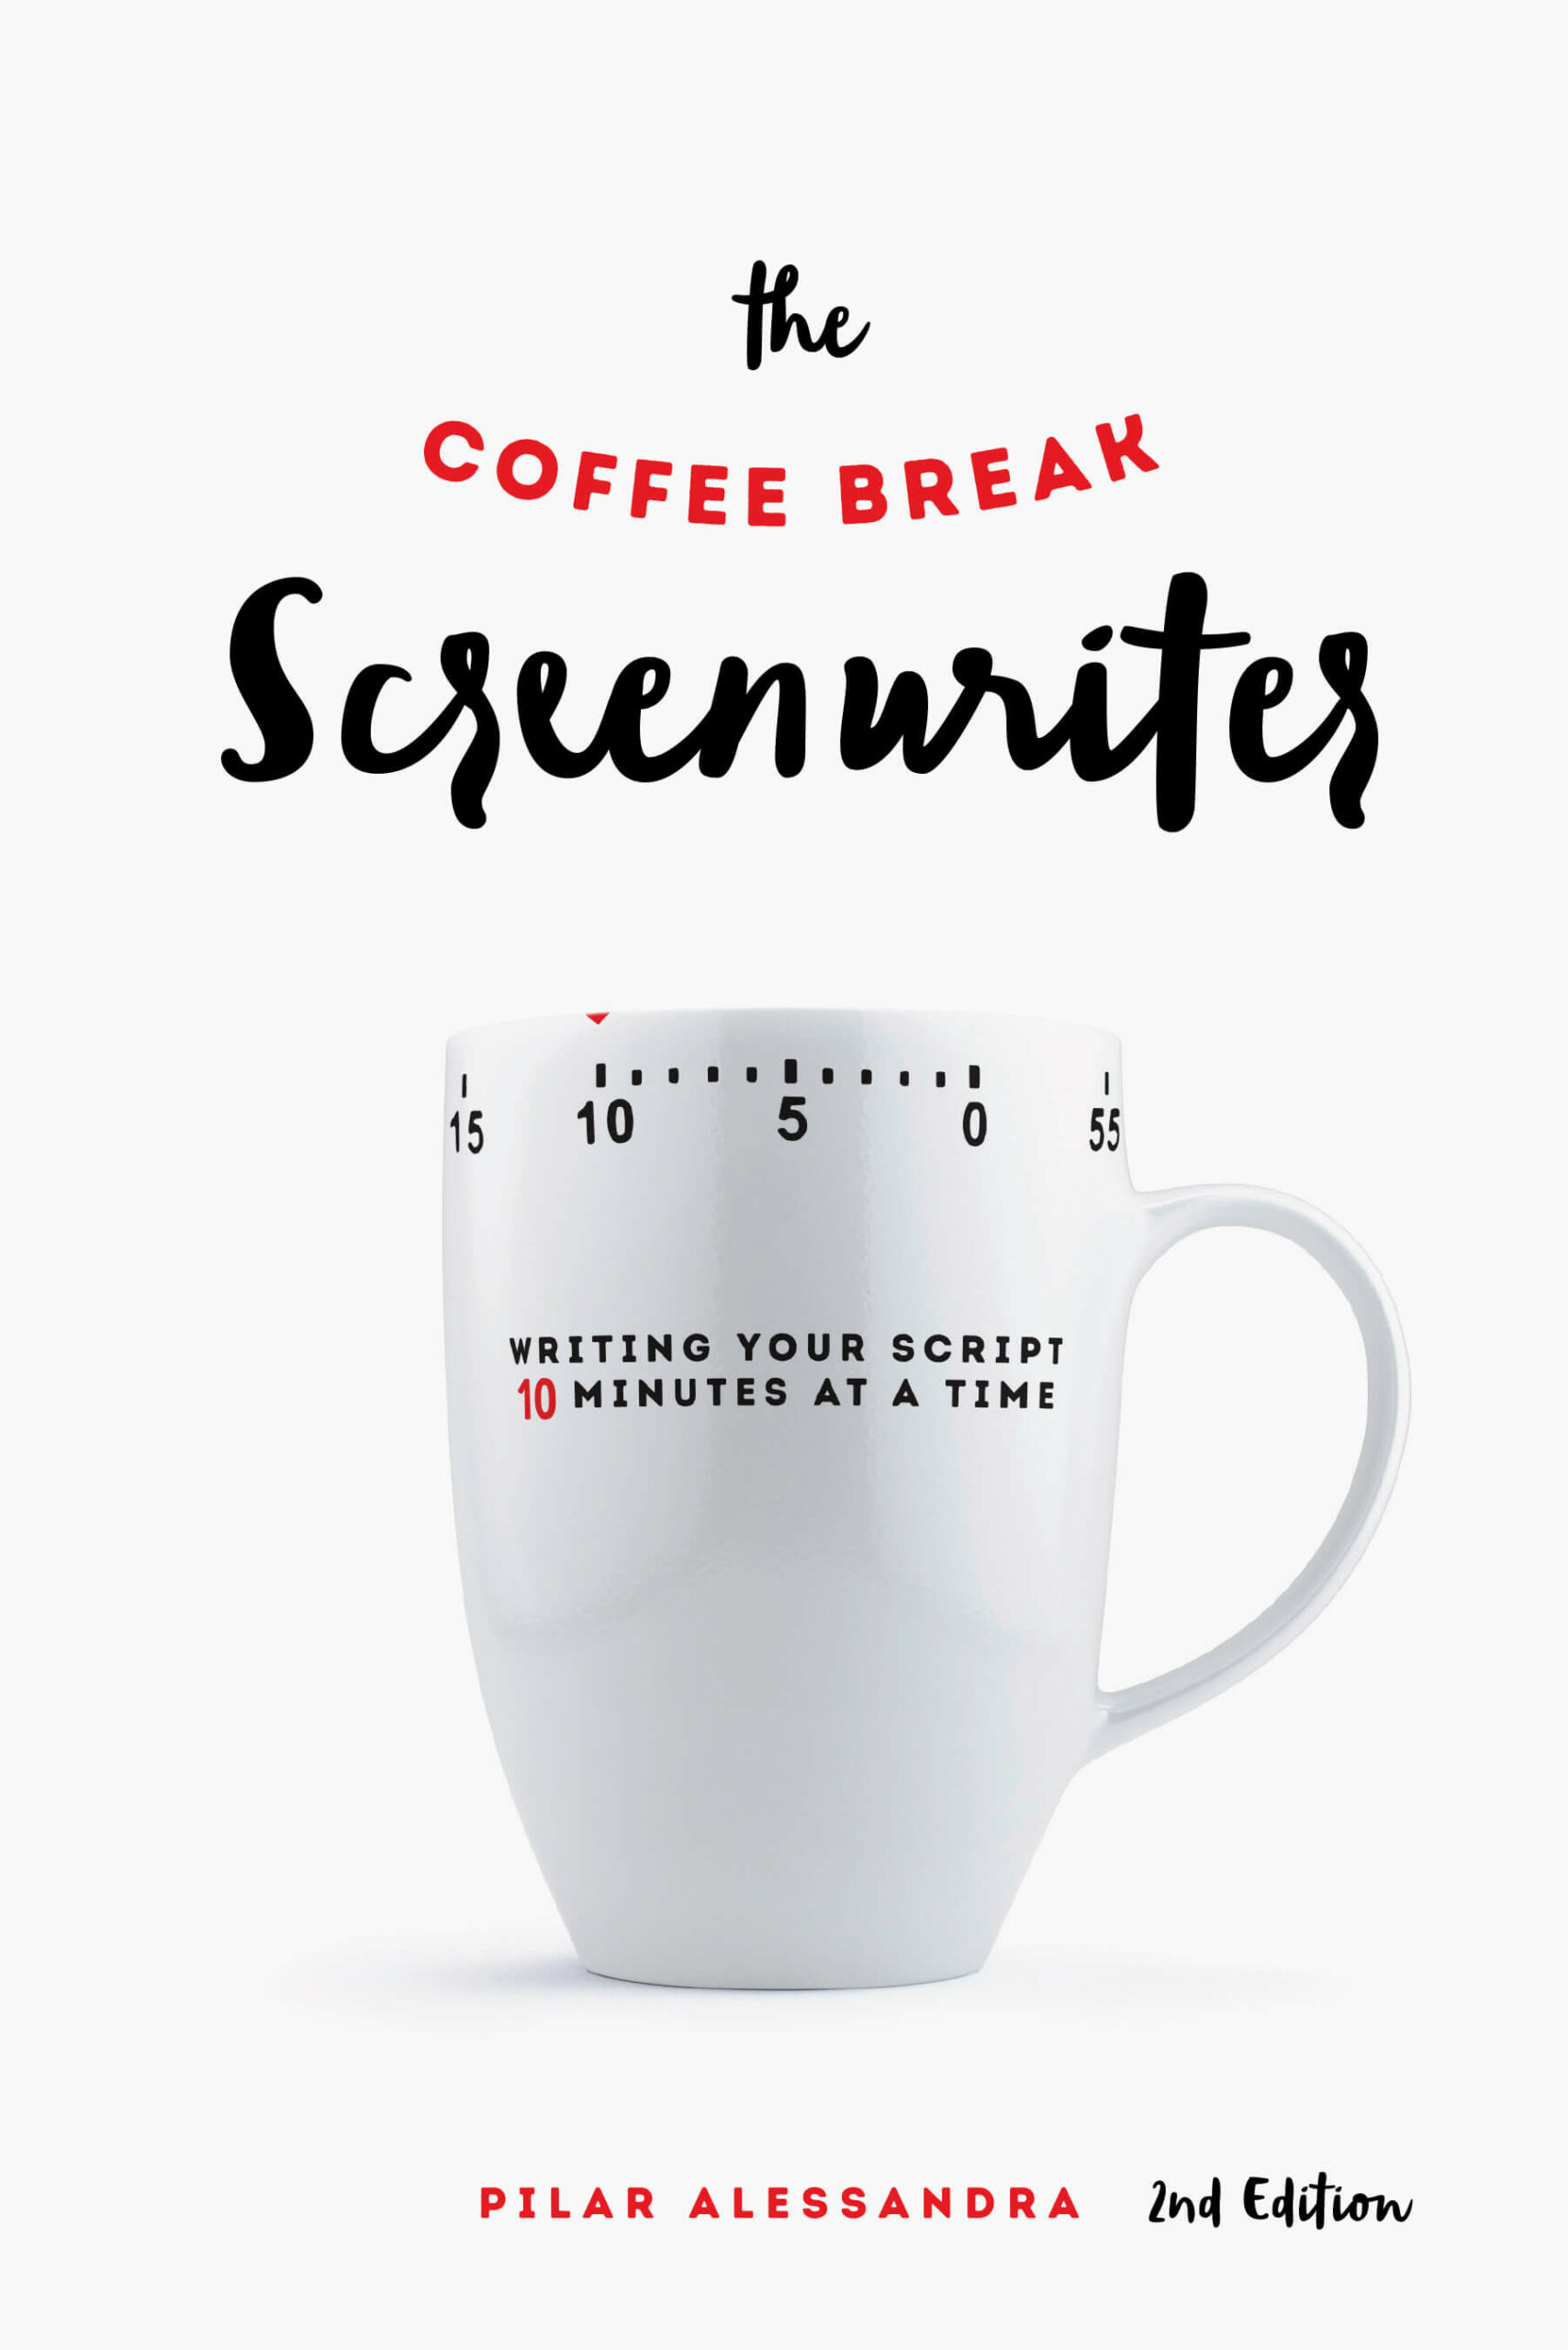 The Coffee Break Screenwriter: Writing Your Script Ten Minutes at a Time – 2nd Edition